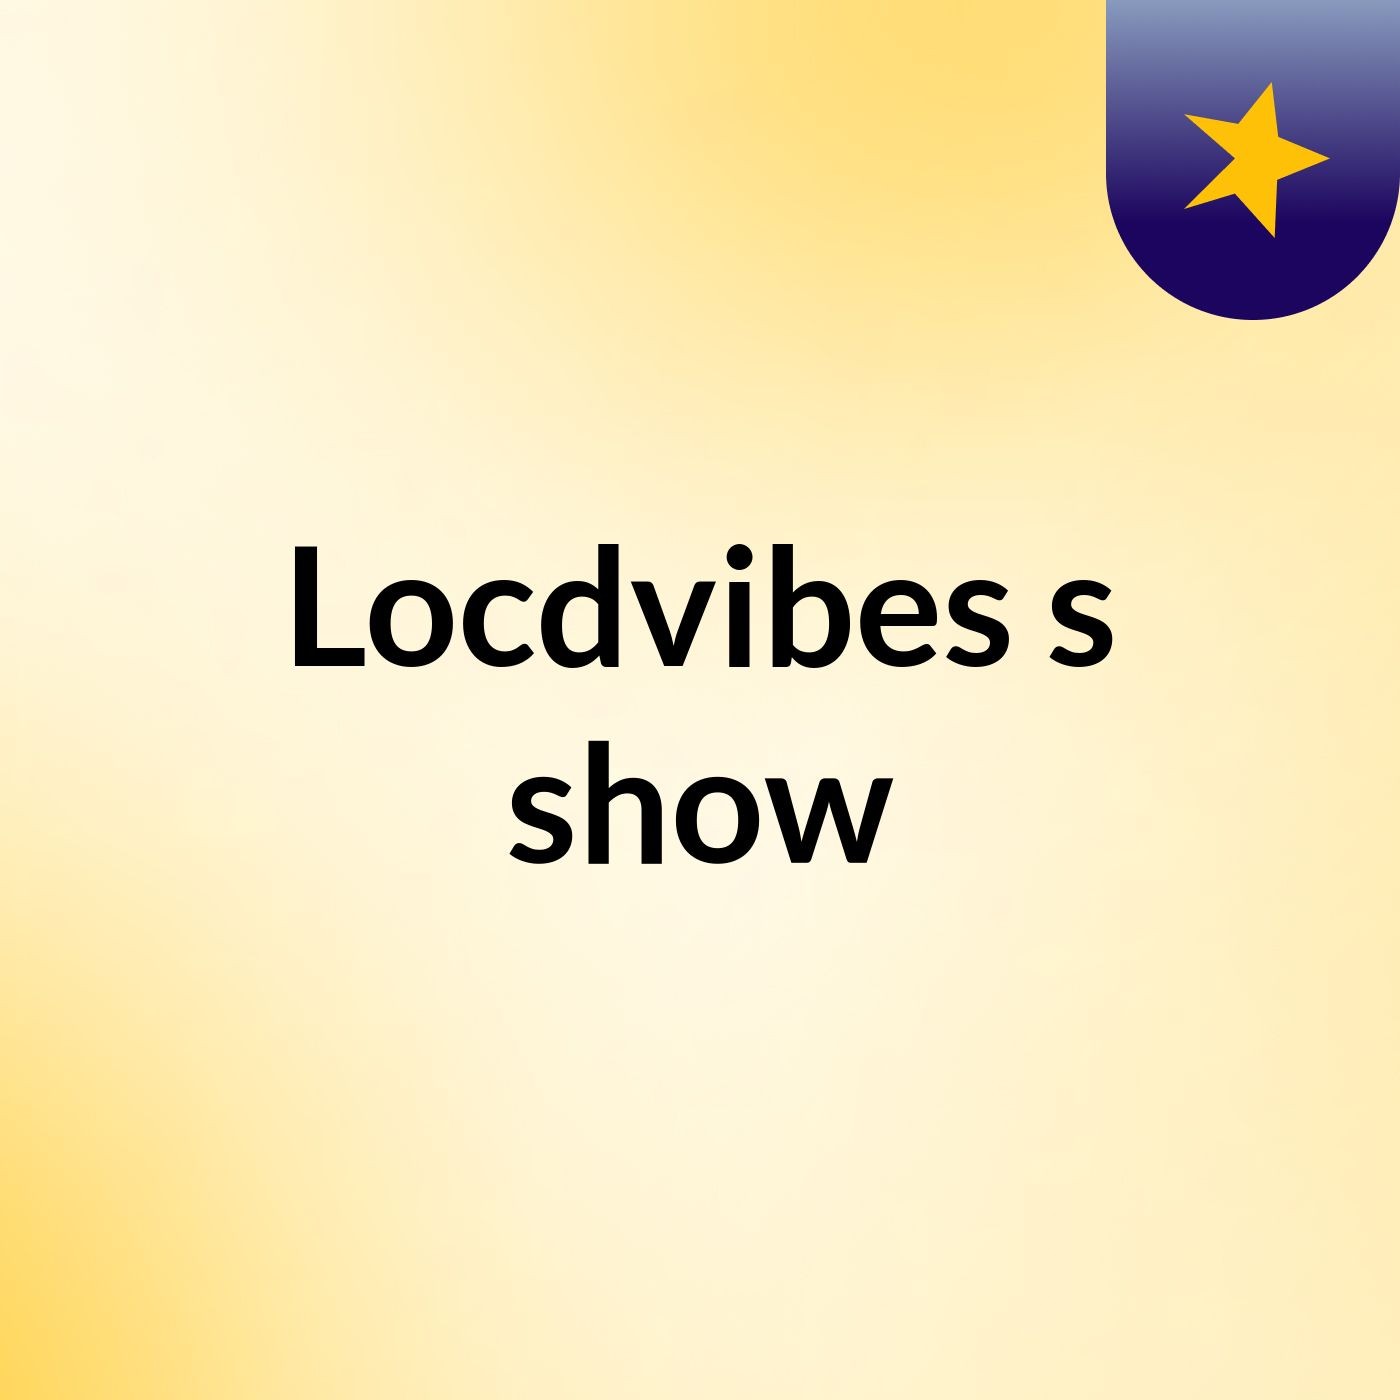 Locdvibes's show